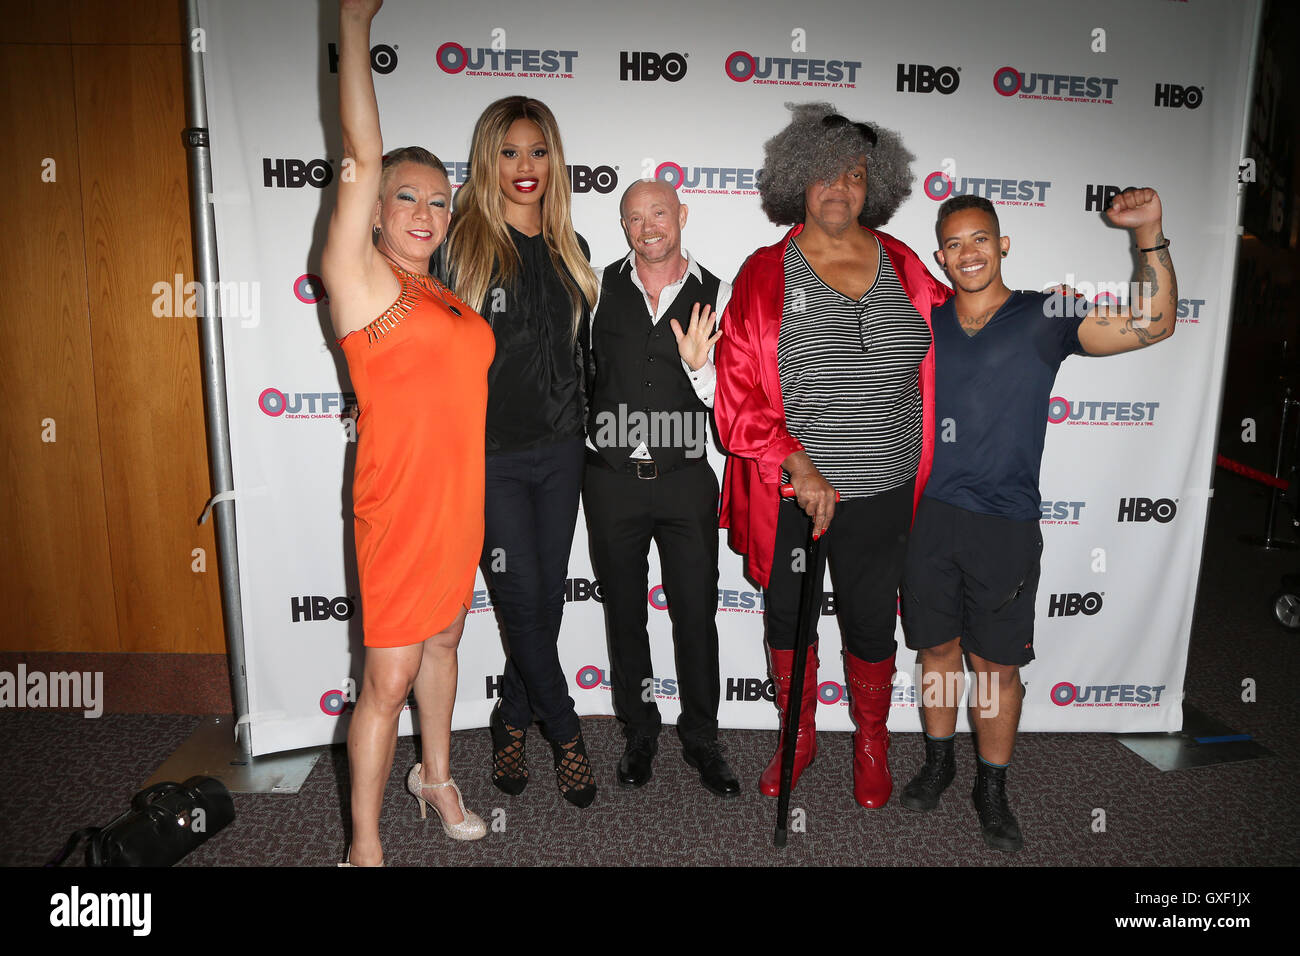 Outfest 2016 Screening Of 'The Trans List'  Featuring: Bamby Salcedo, Laverne Cox, Buck Angel, Miss Major, Shane Ortega Where: West Hollywood, California, United States When: 16 Jul 2016 Stock Photo